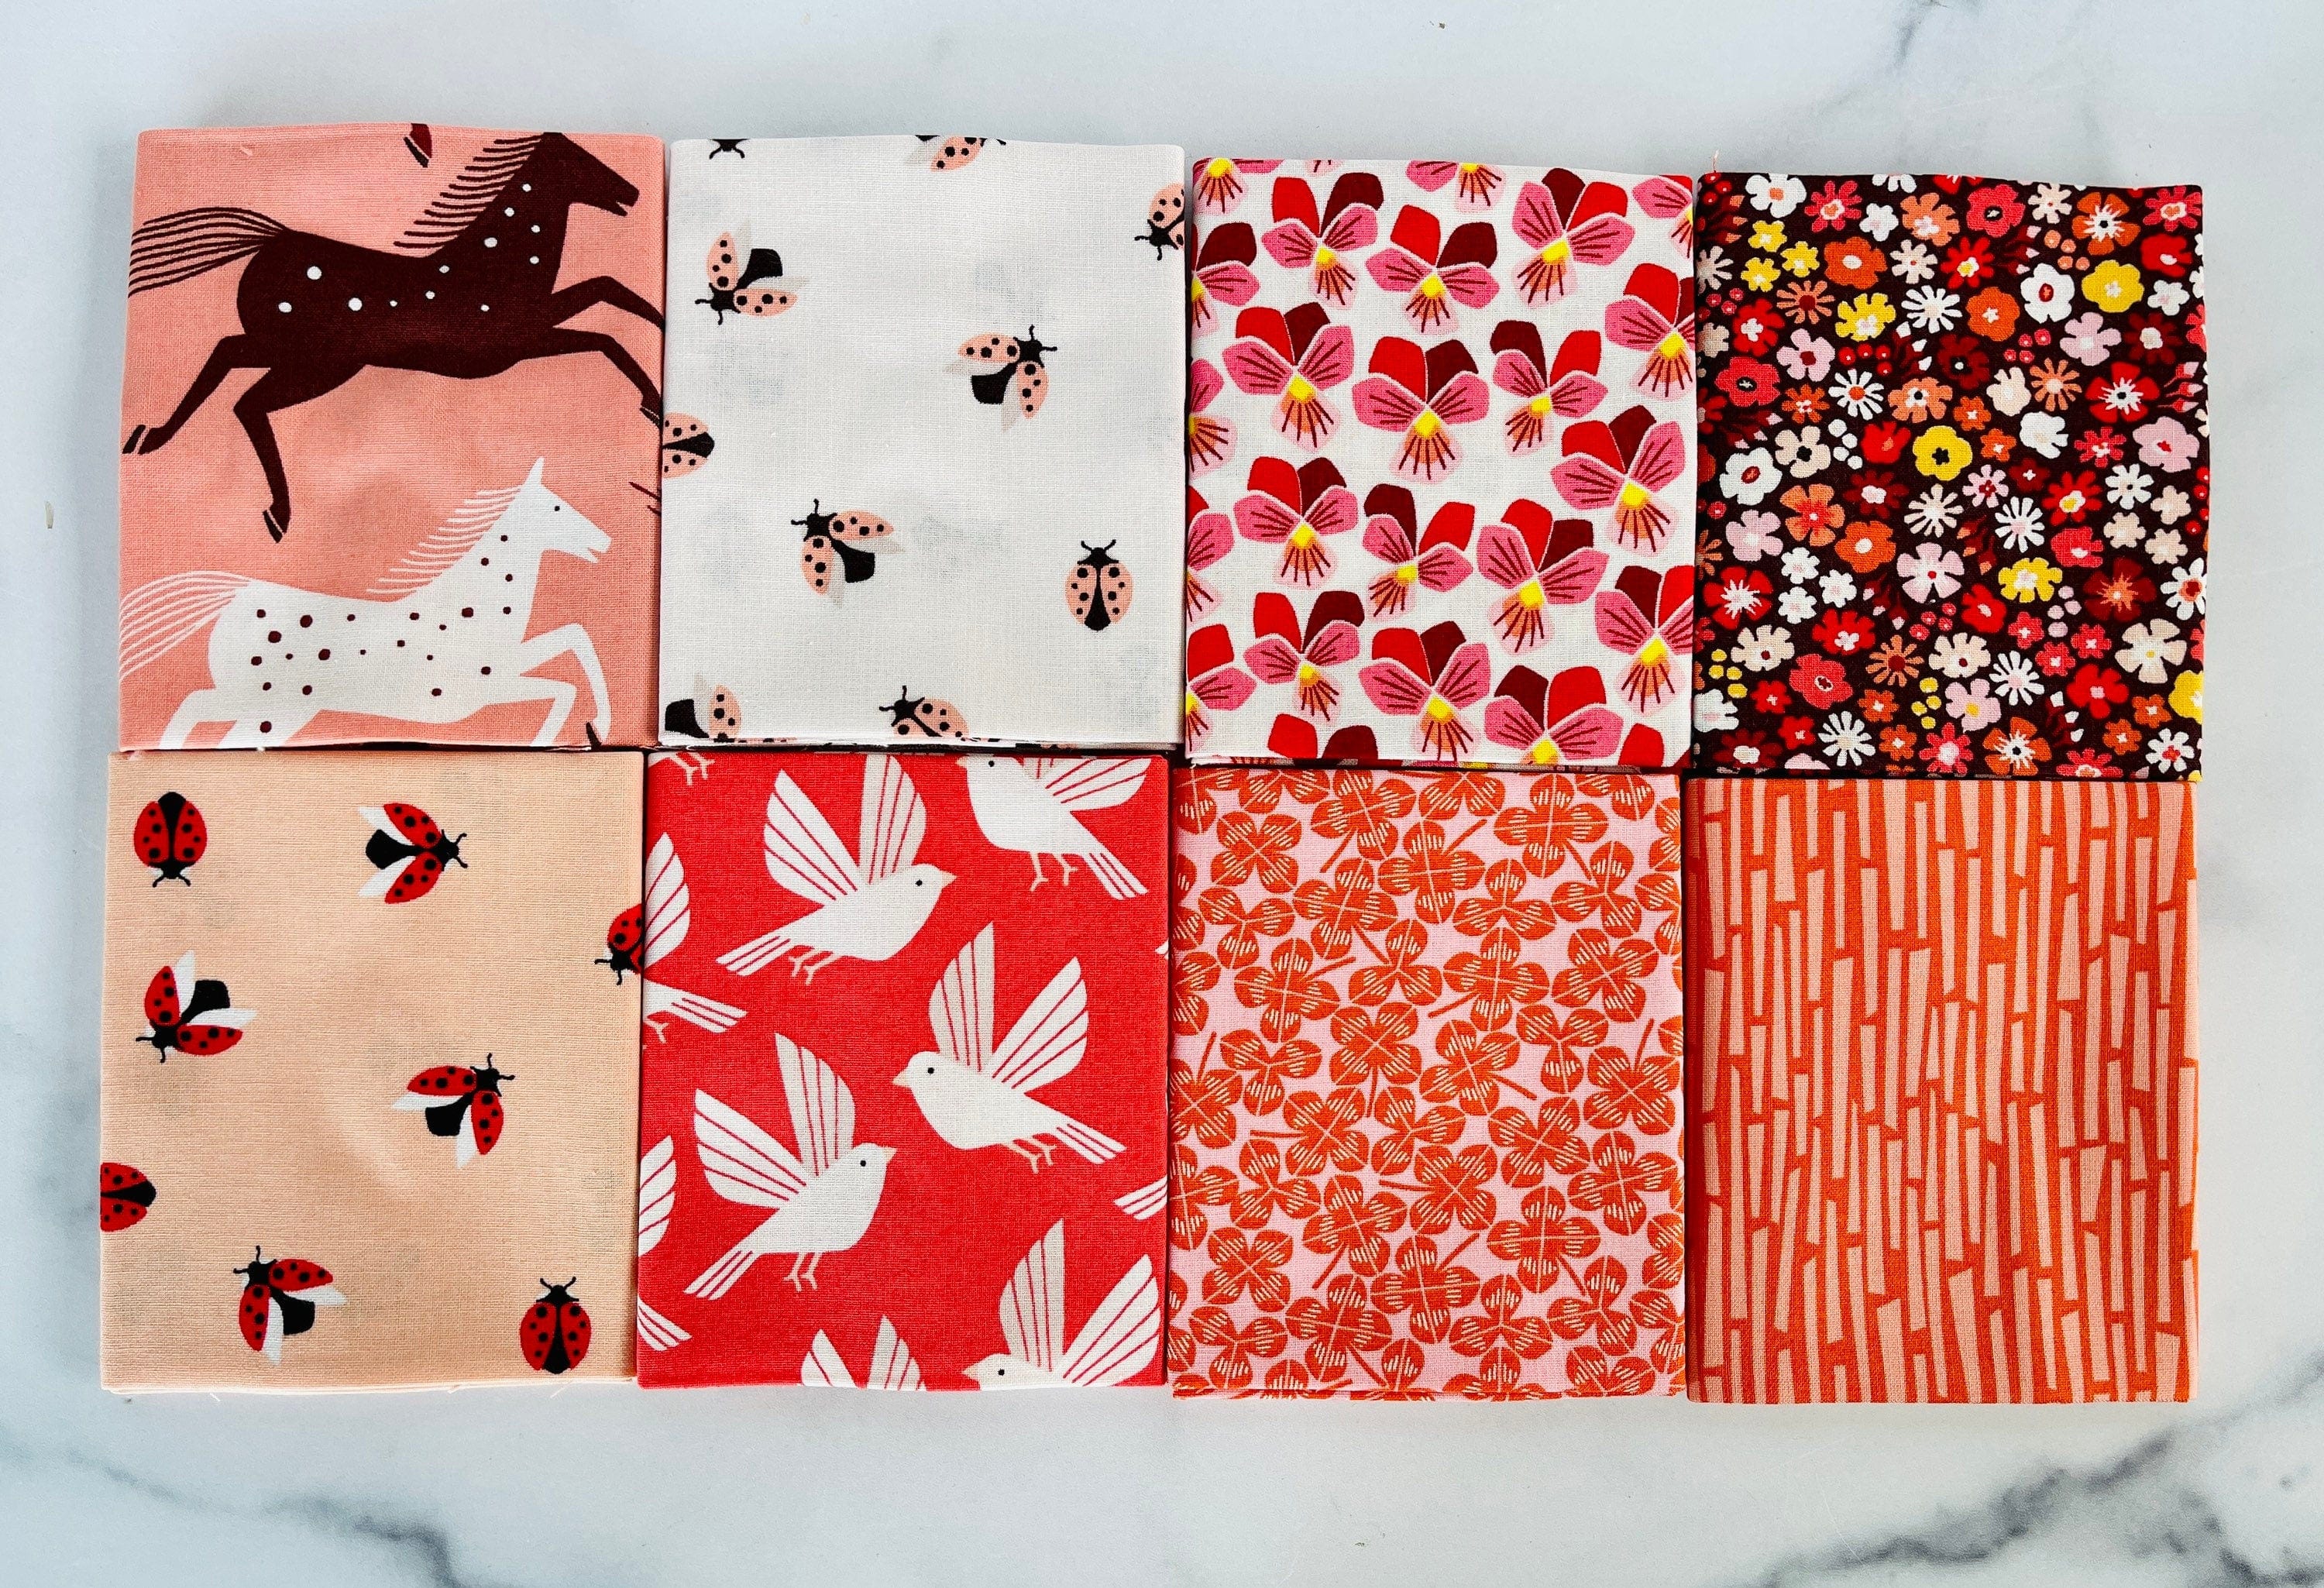 Wild and Free Fat Quarter Bundle (21) Loes Van Oosten Cotton + Steel Fabrics Quilting Cotton Fabric - LV600P-FQB